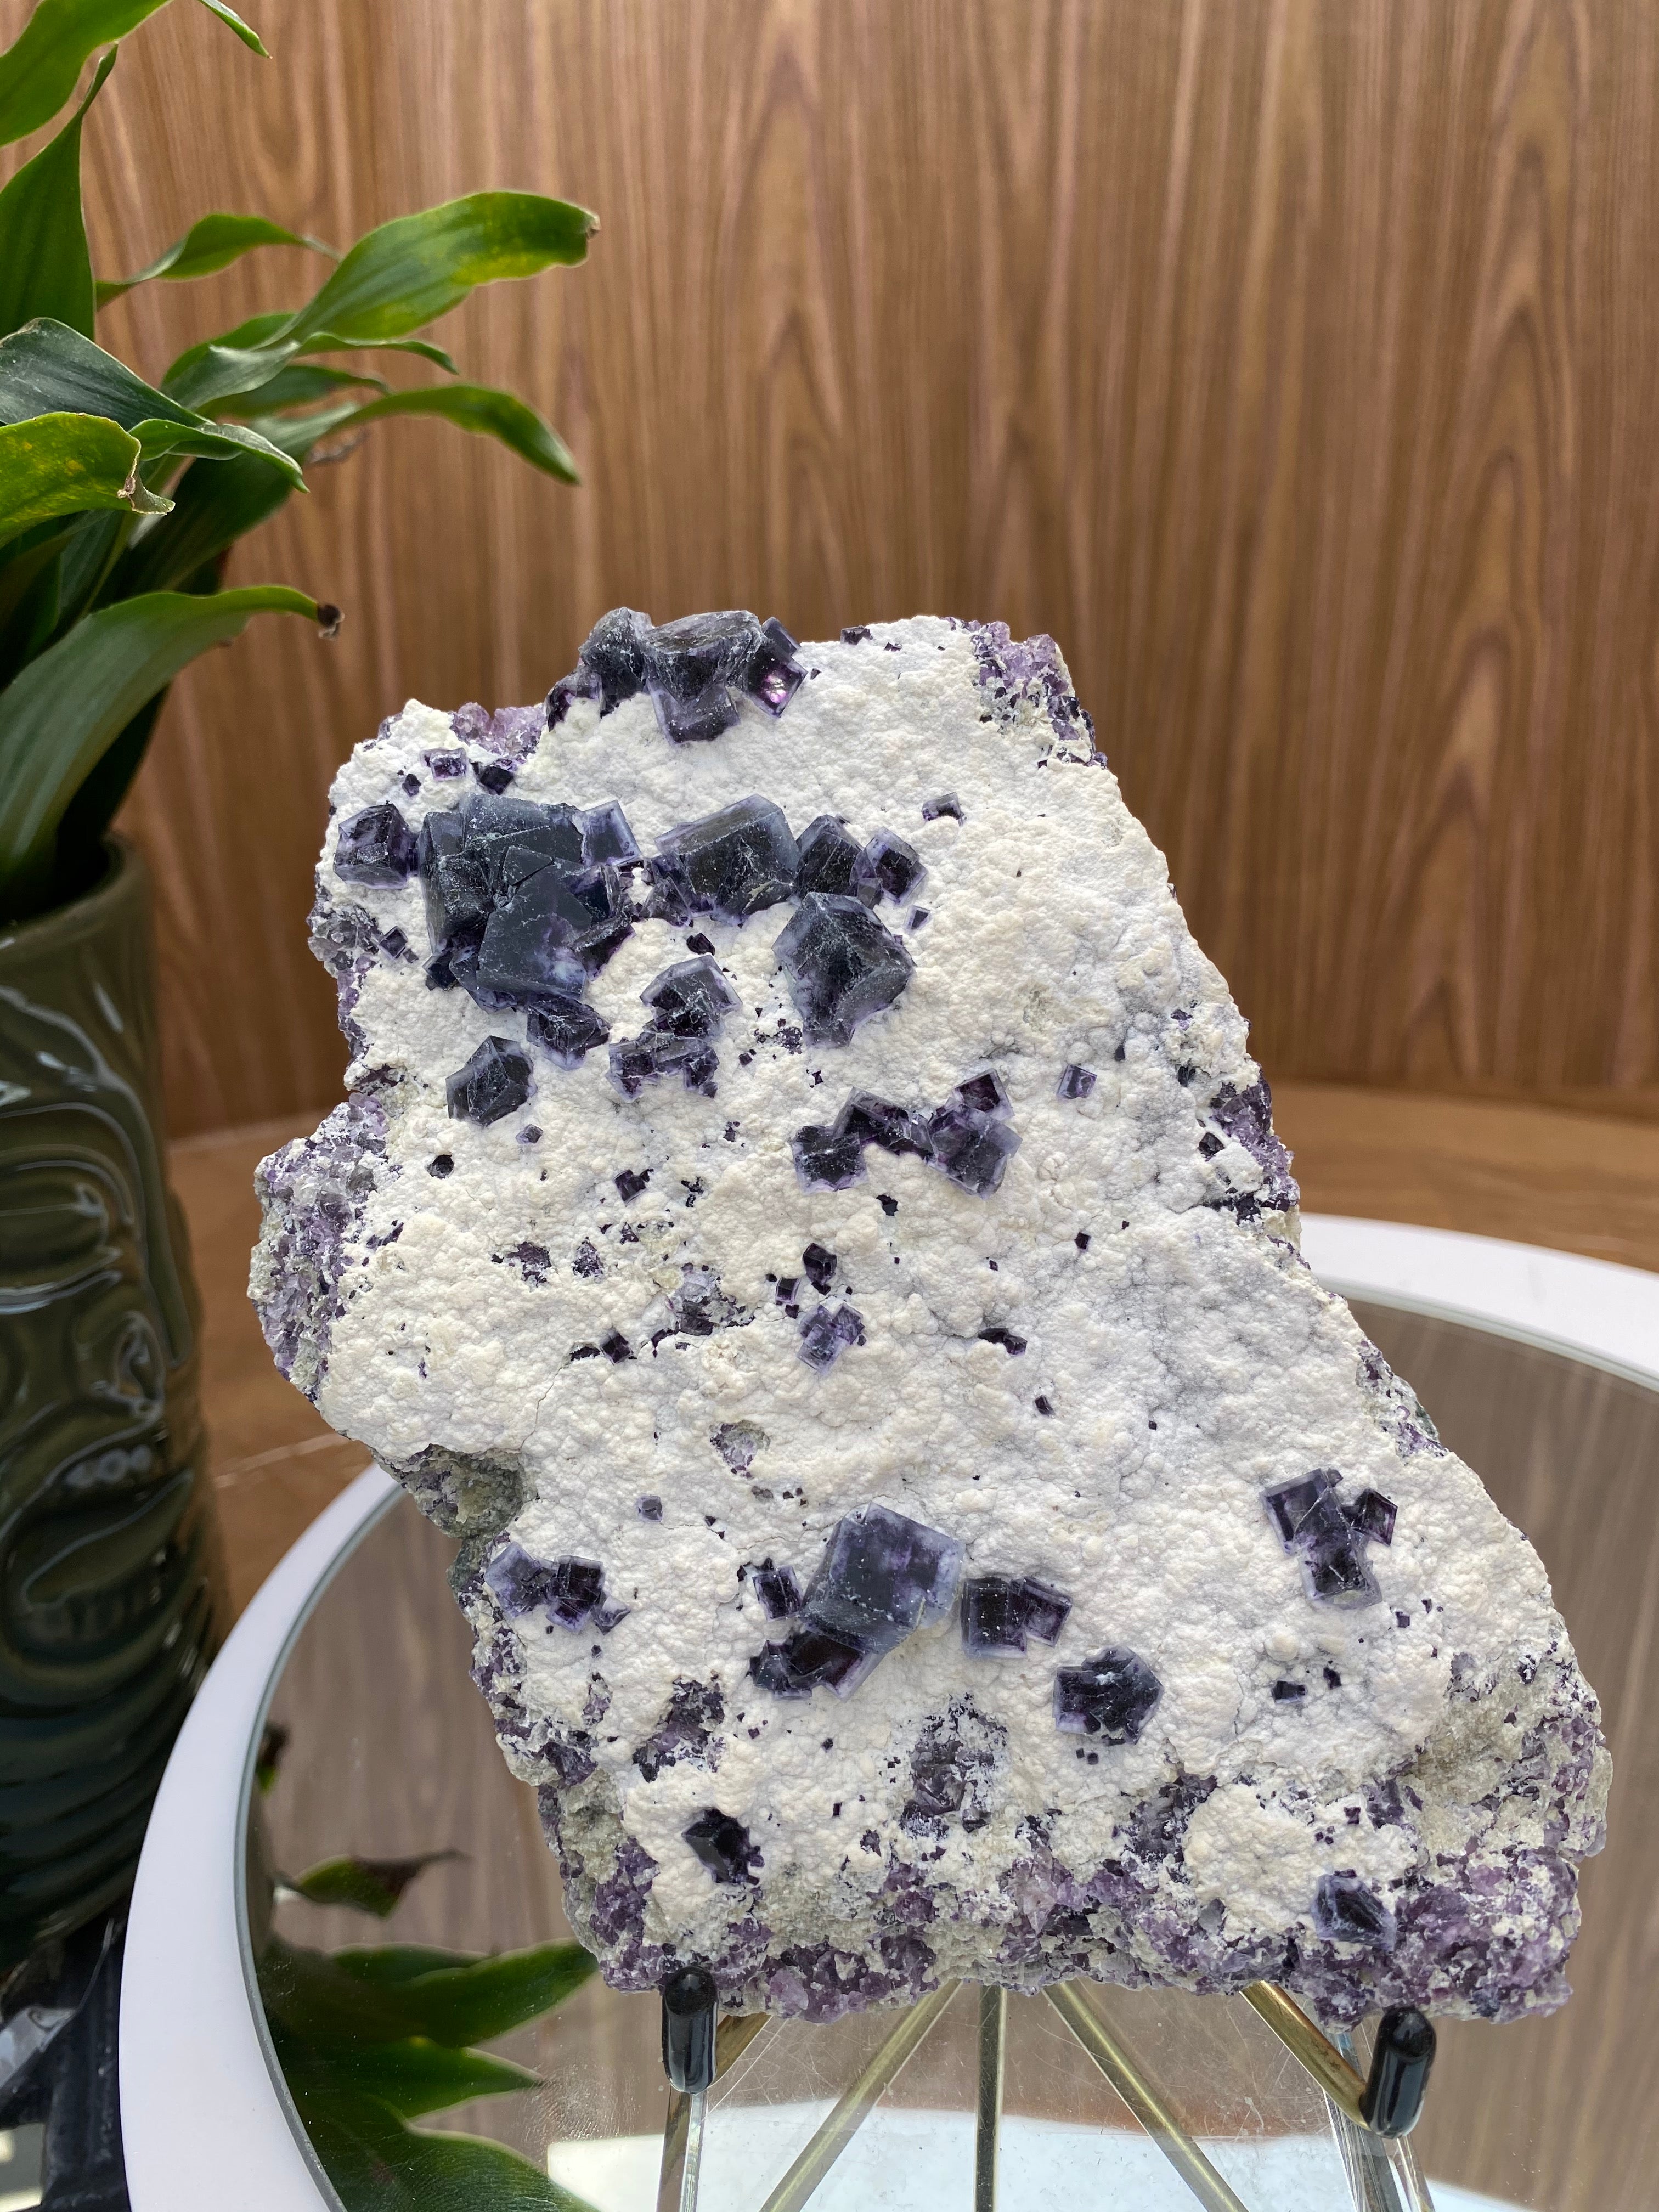 450g 16x12x3cm Dots White and Purple Fluorite from Inner Mongolia, China